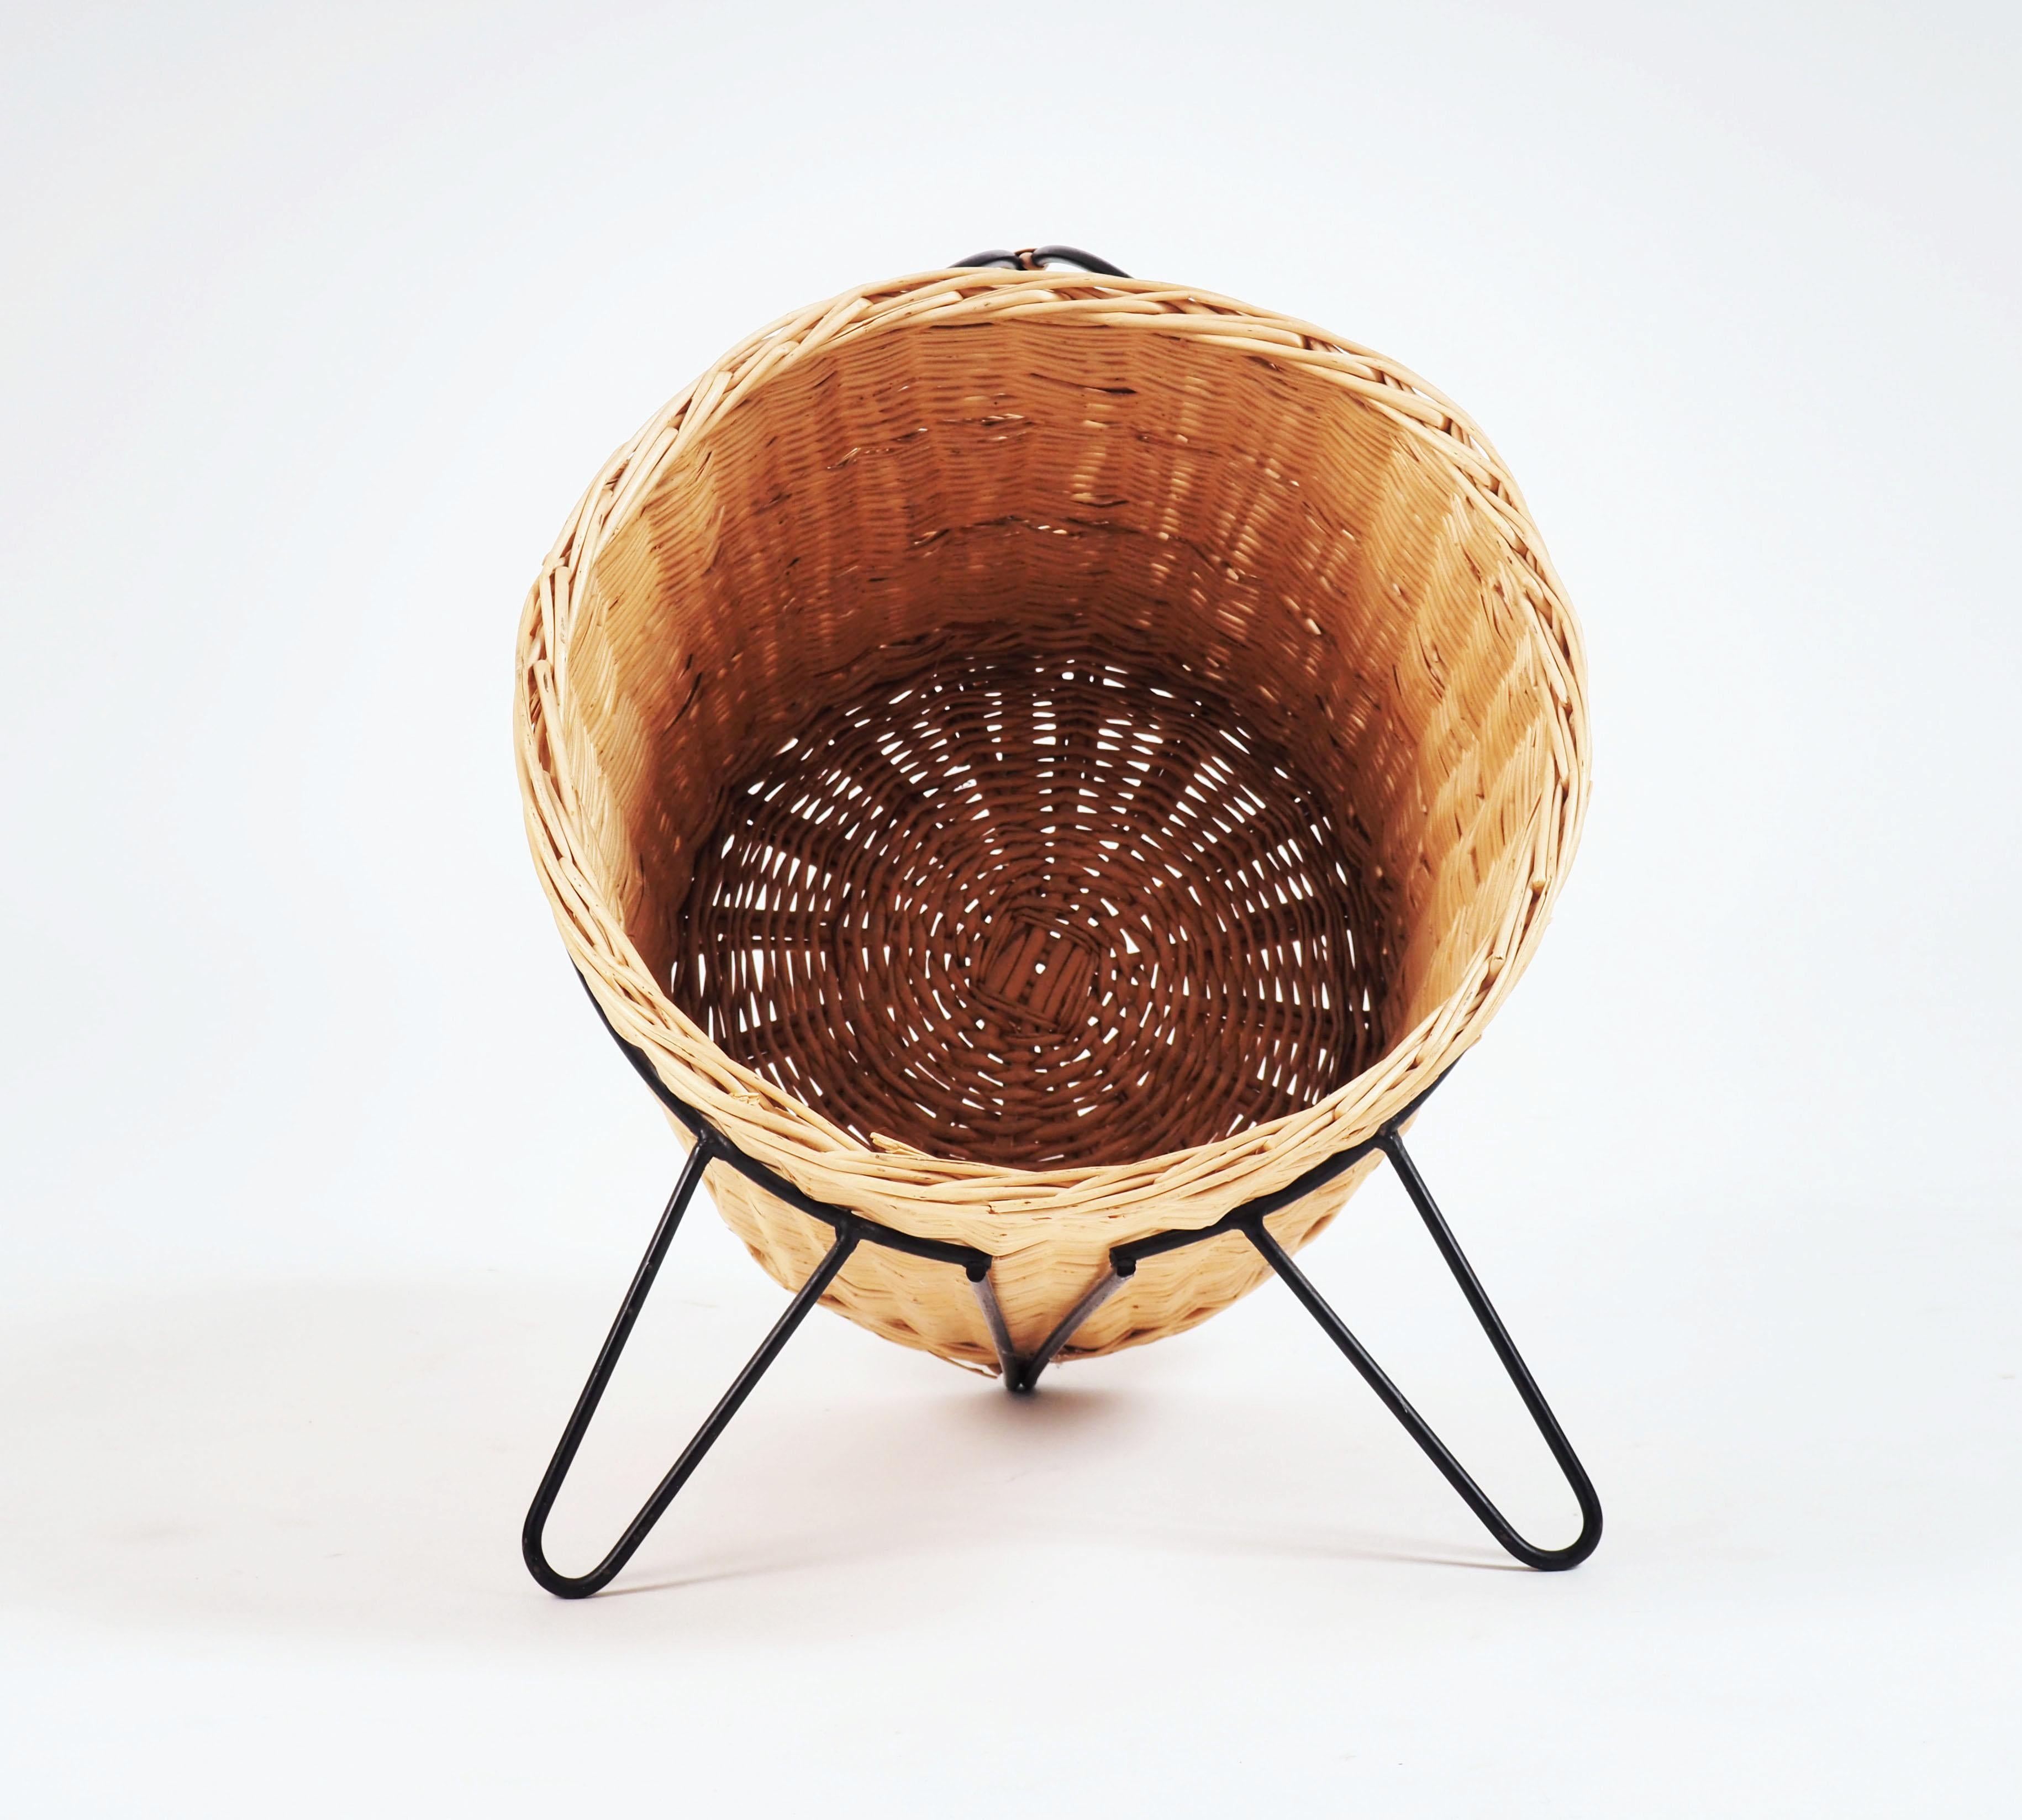 Basket for firewood or magazines in painted metal and rattan. Made in Sweden during the 1950s.